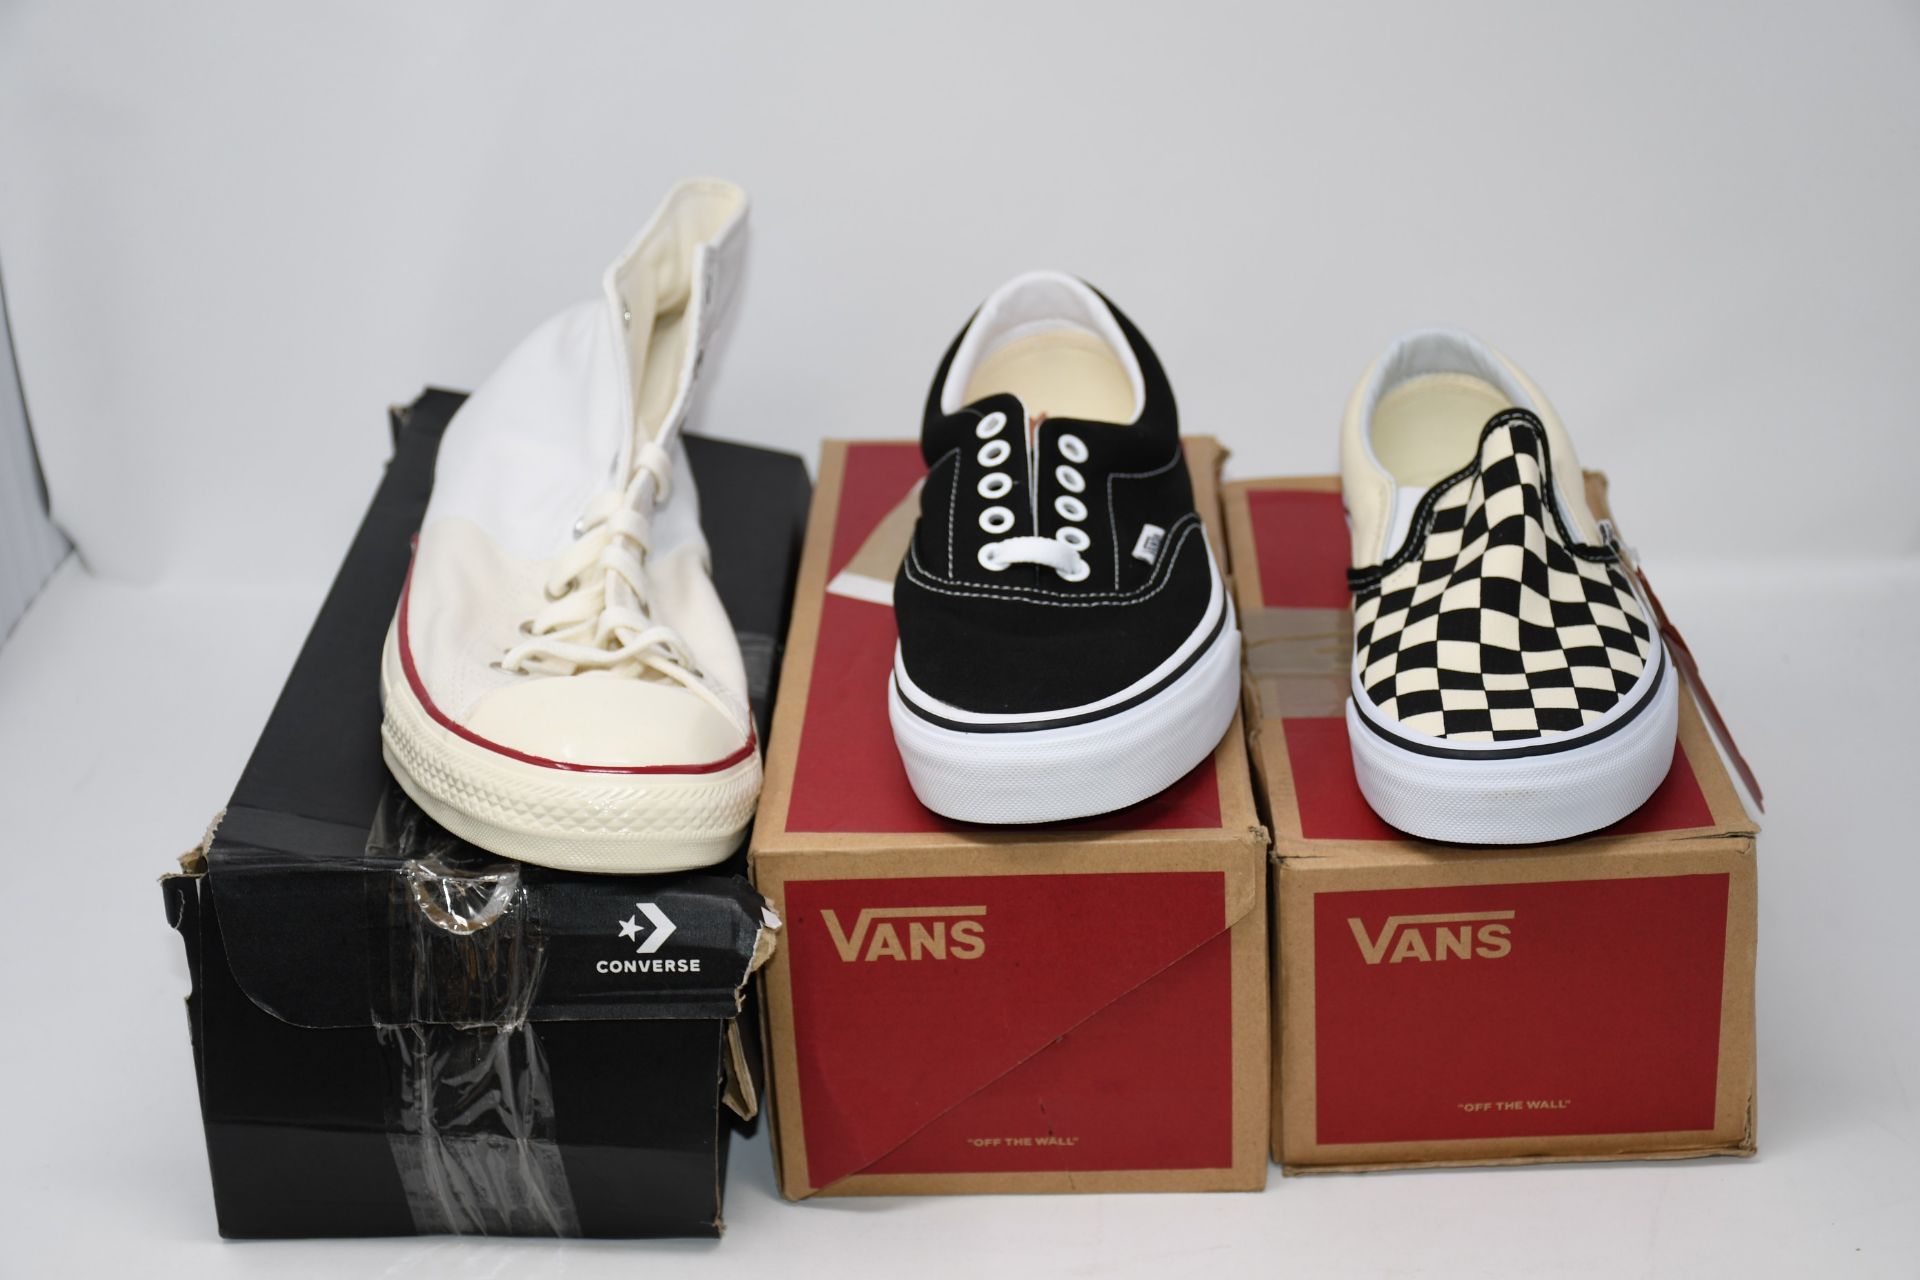 One as new Vans Era size UK 7 (3413177270). One as new Vans Classic Checkerboard size UK 4 (